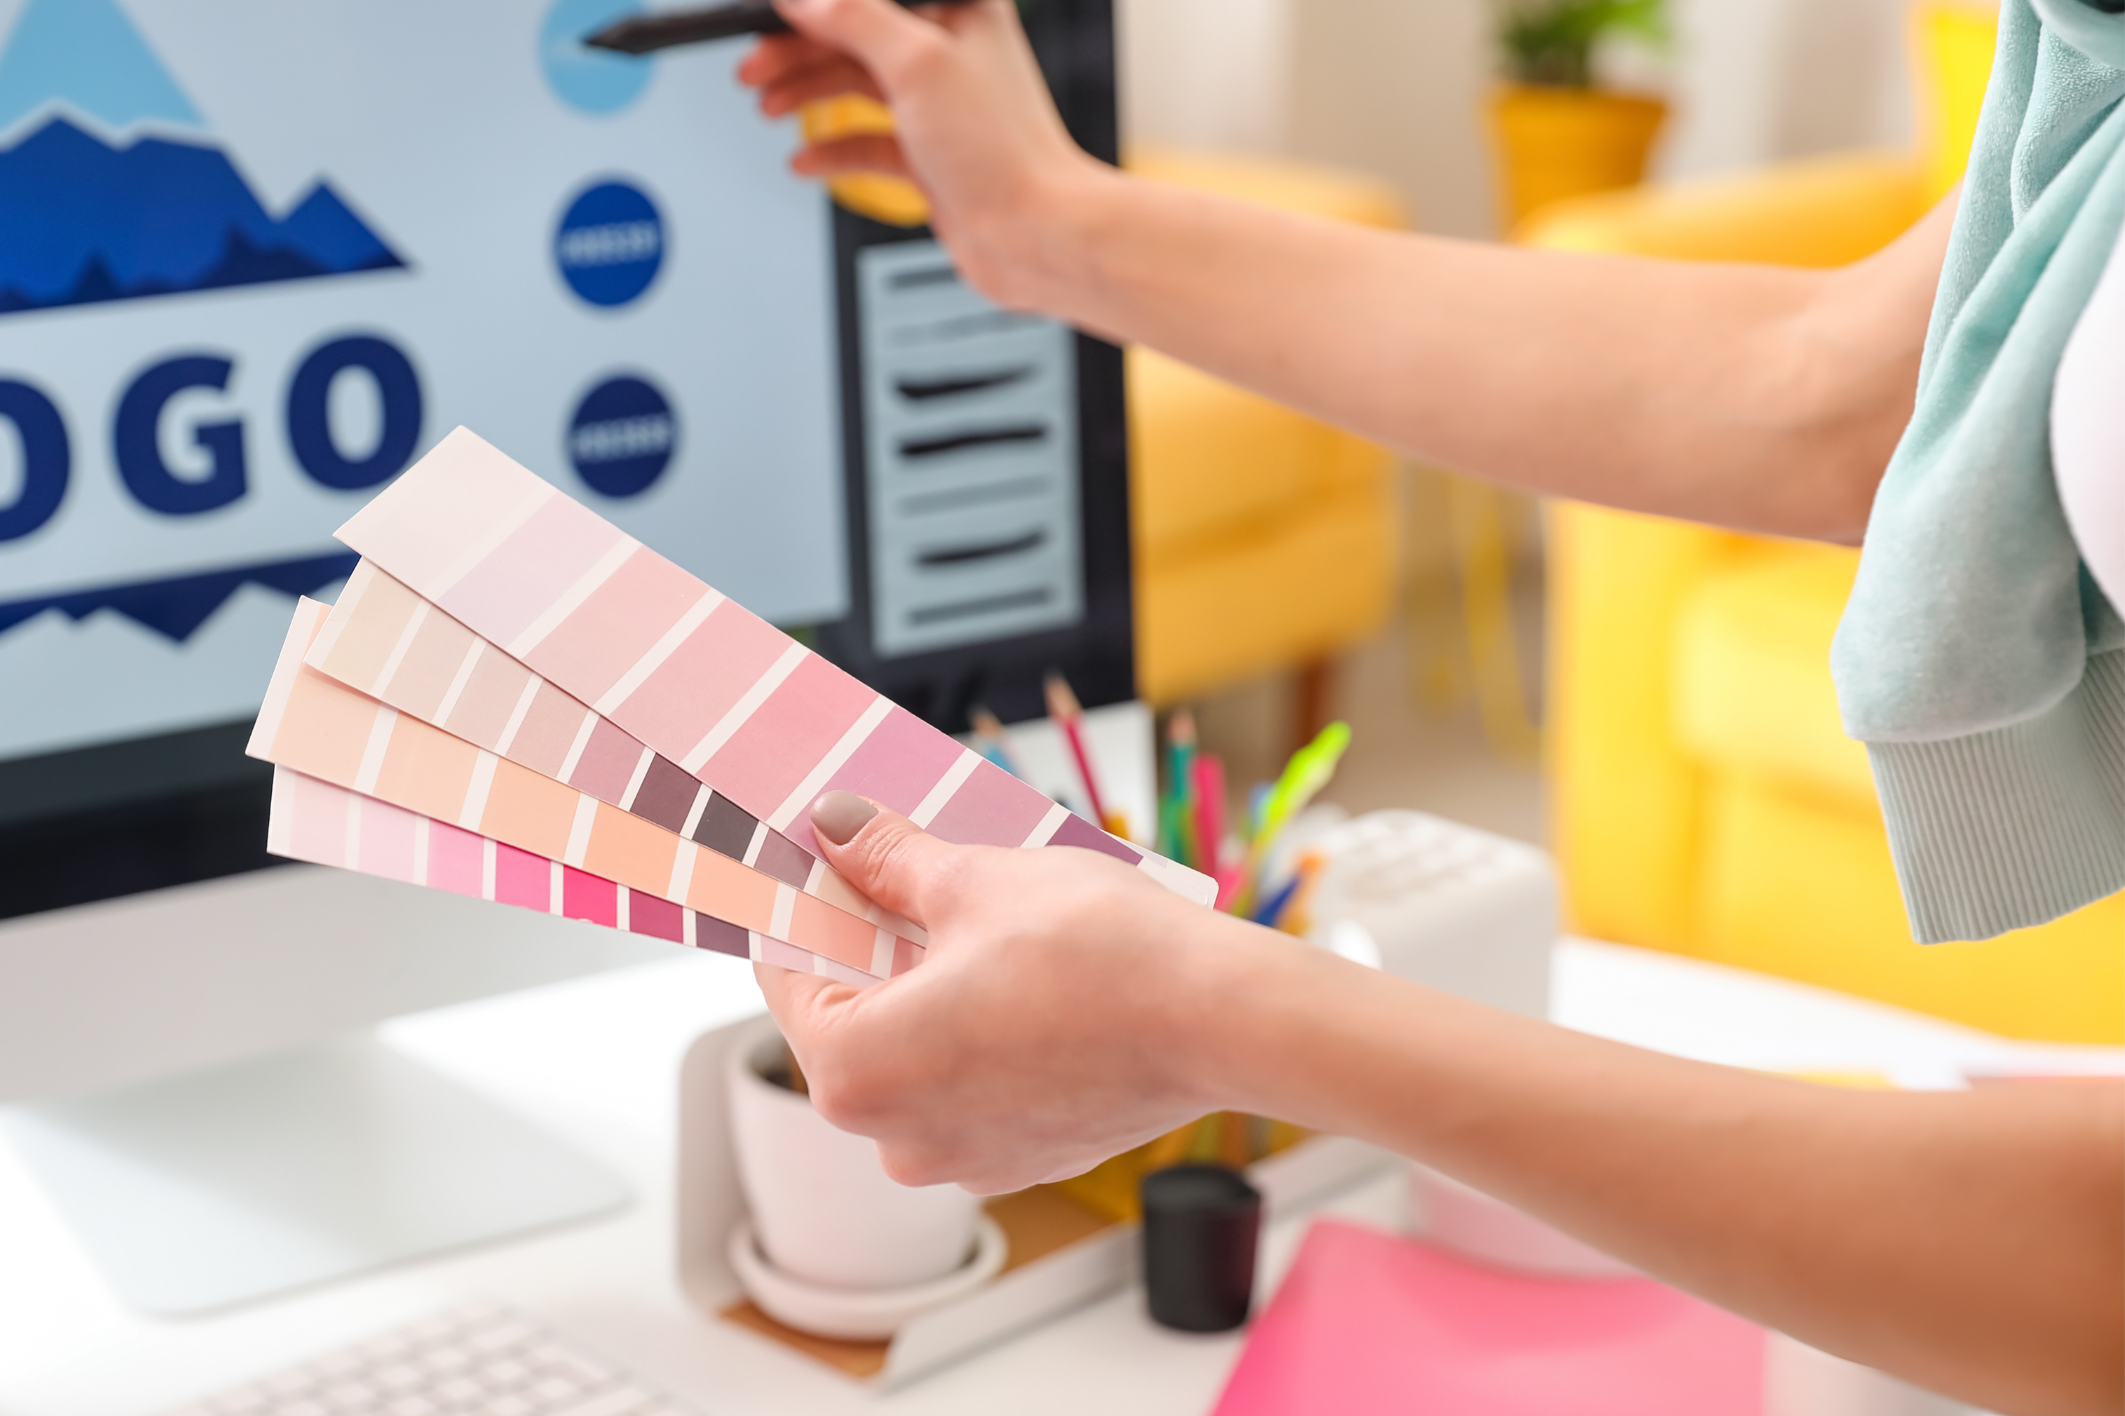 An Image of a woman holding up color swatches to pair with a company logo